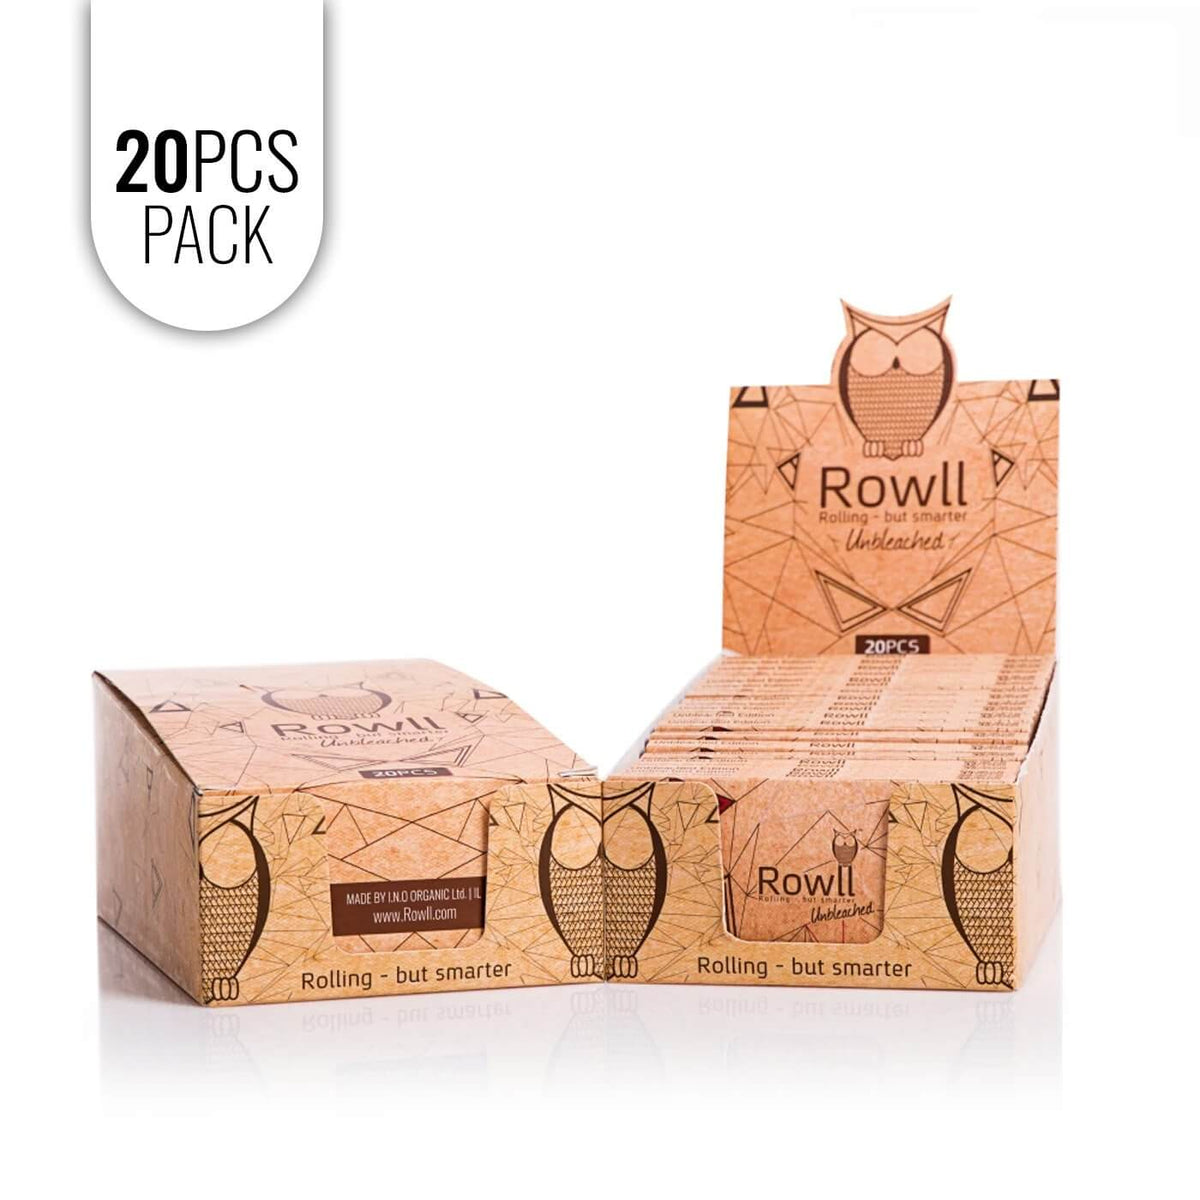 ROWLL® all in 1 Rolling Kit Unbleached Rowll